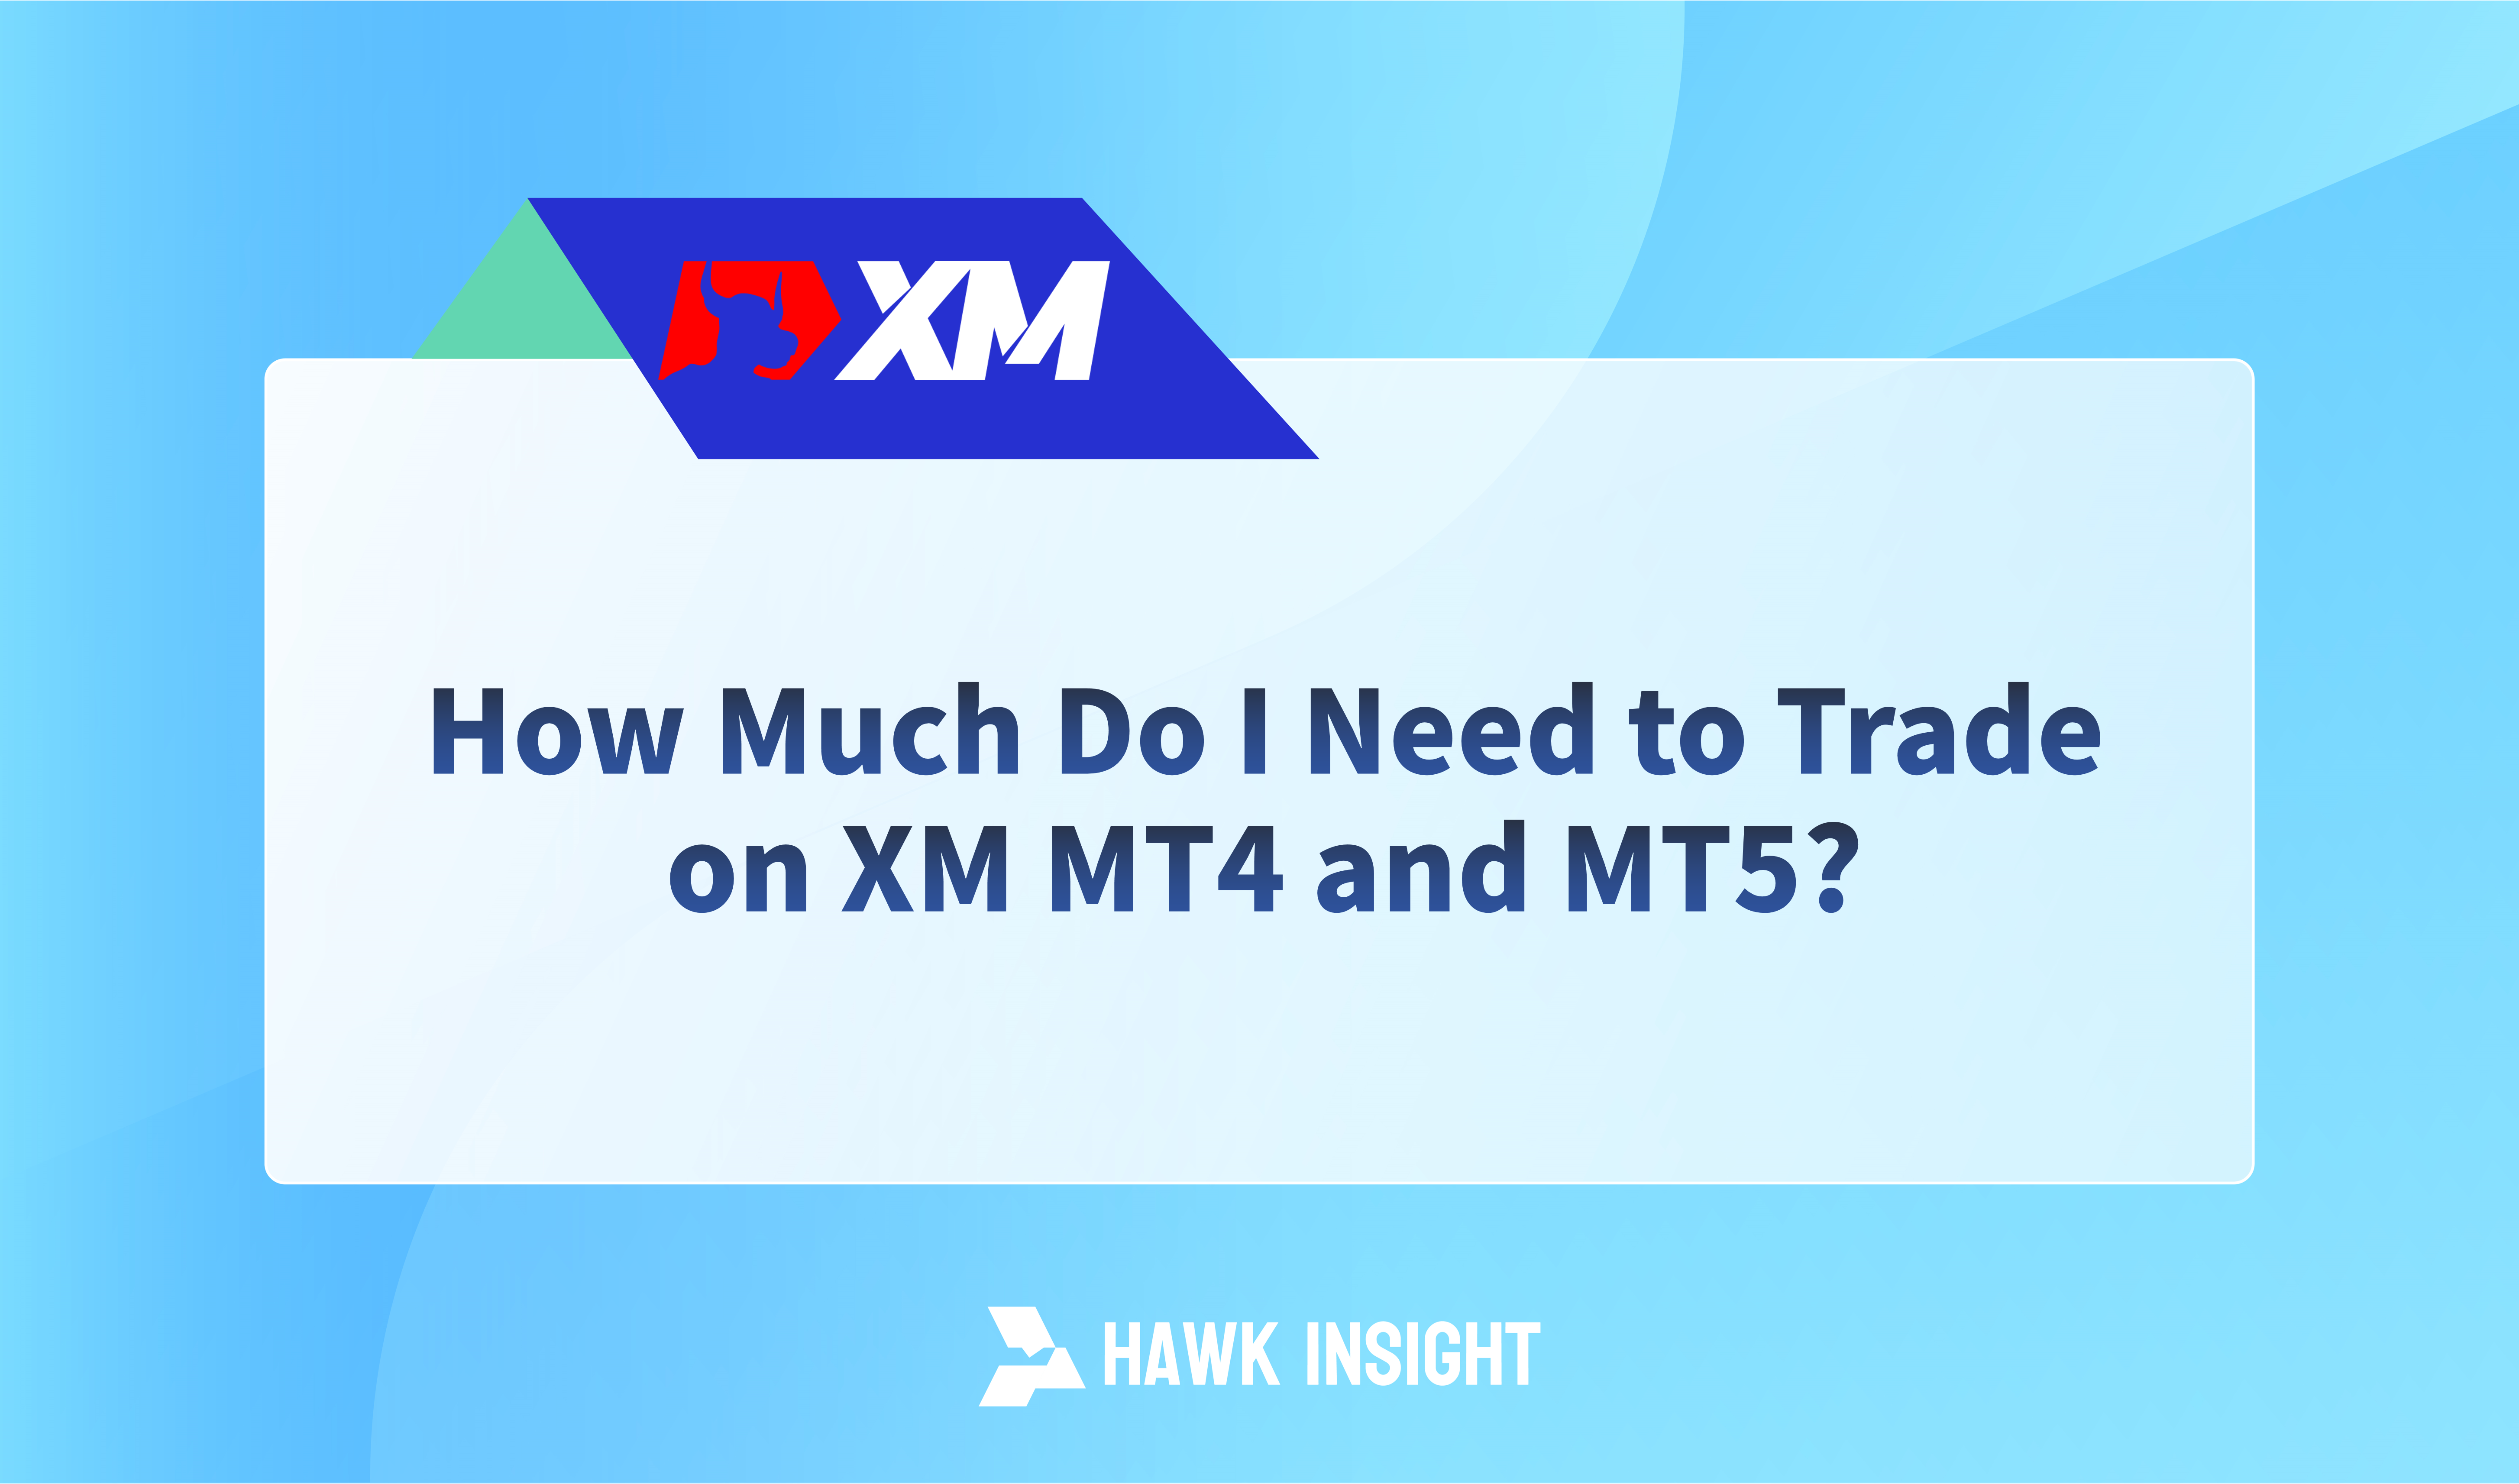 How to Trade on XM MT4 and MT5?